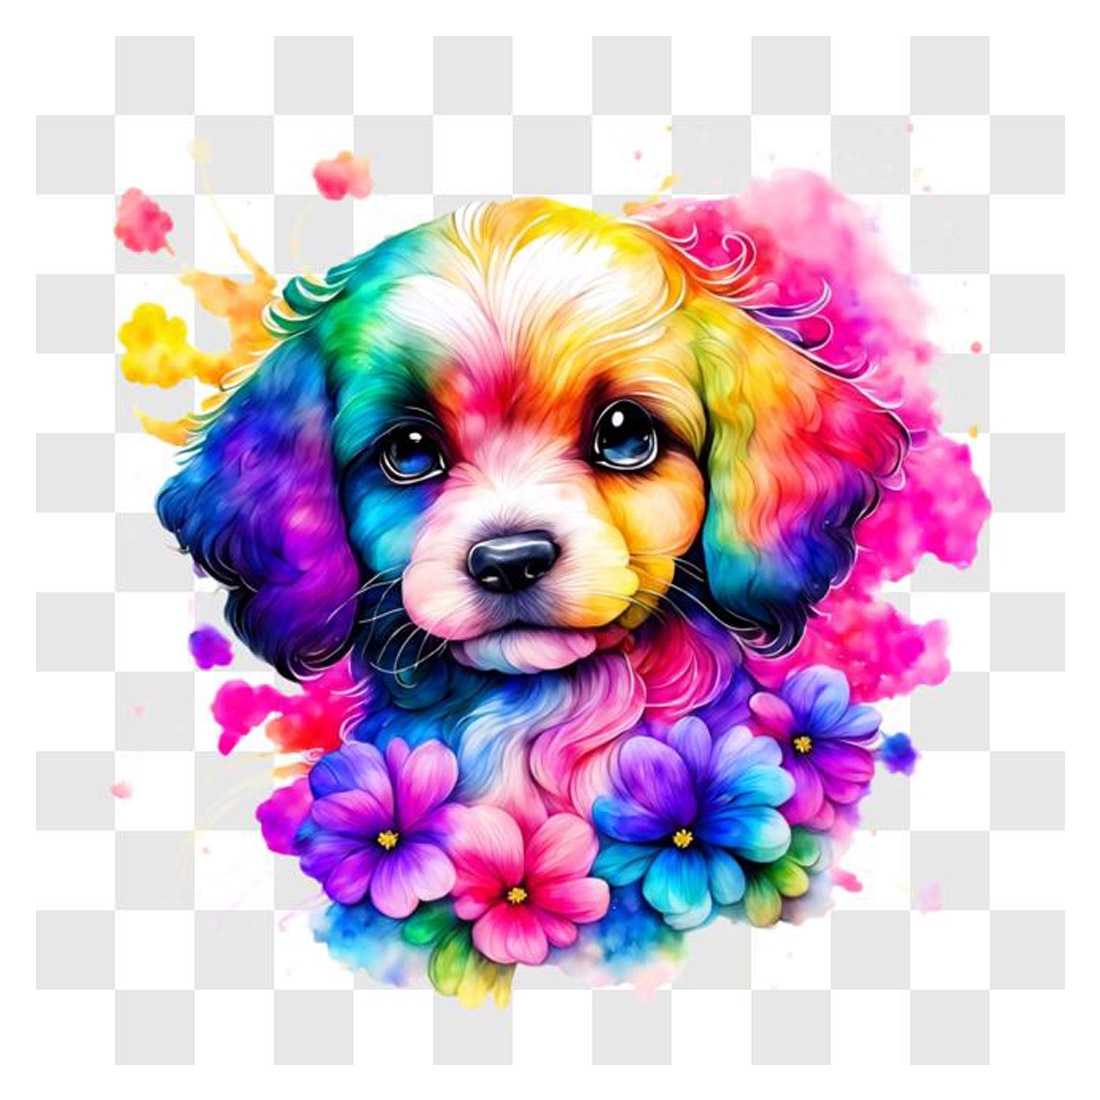 Colorful Dogs: Raising Awareness About Pet Overpopulation PNG cover image.